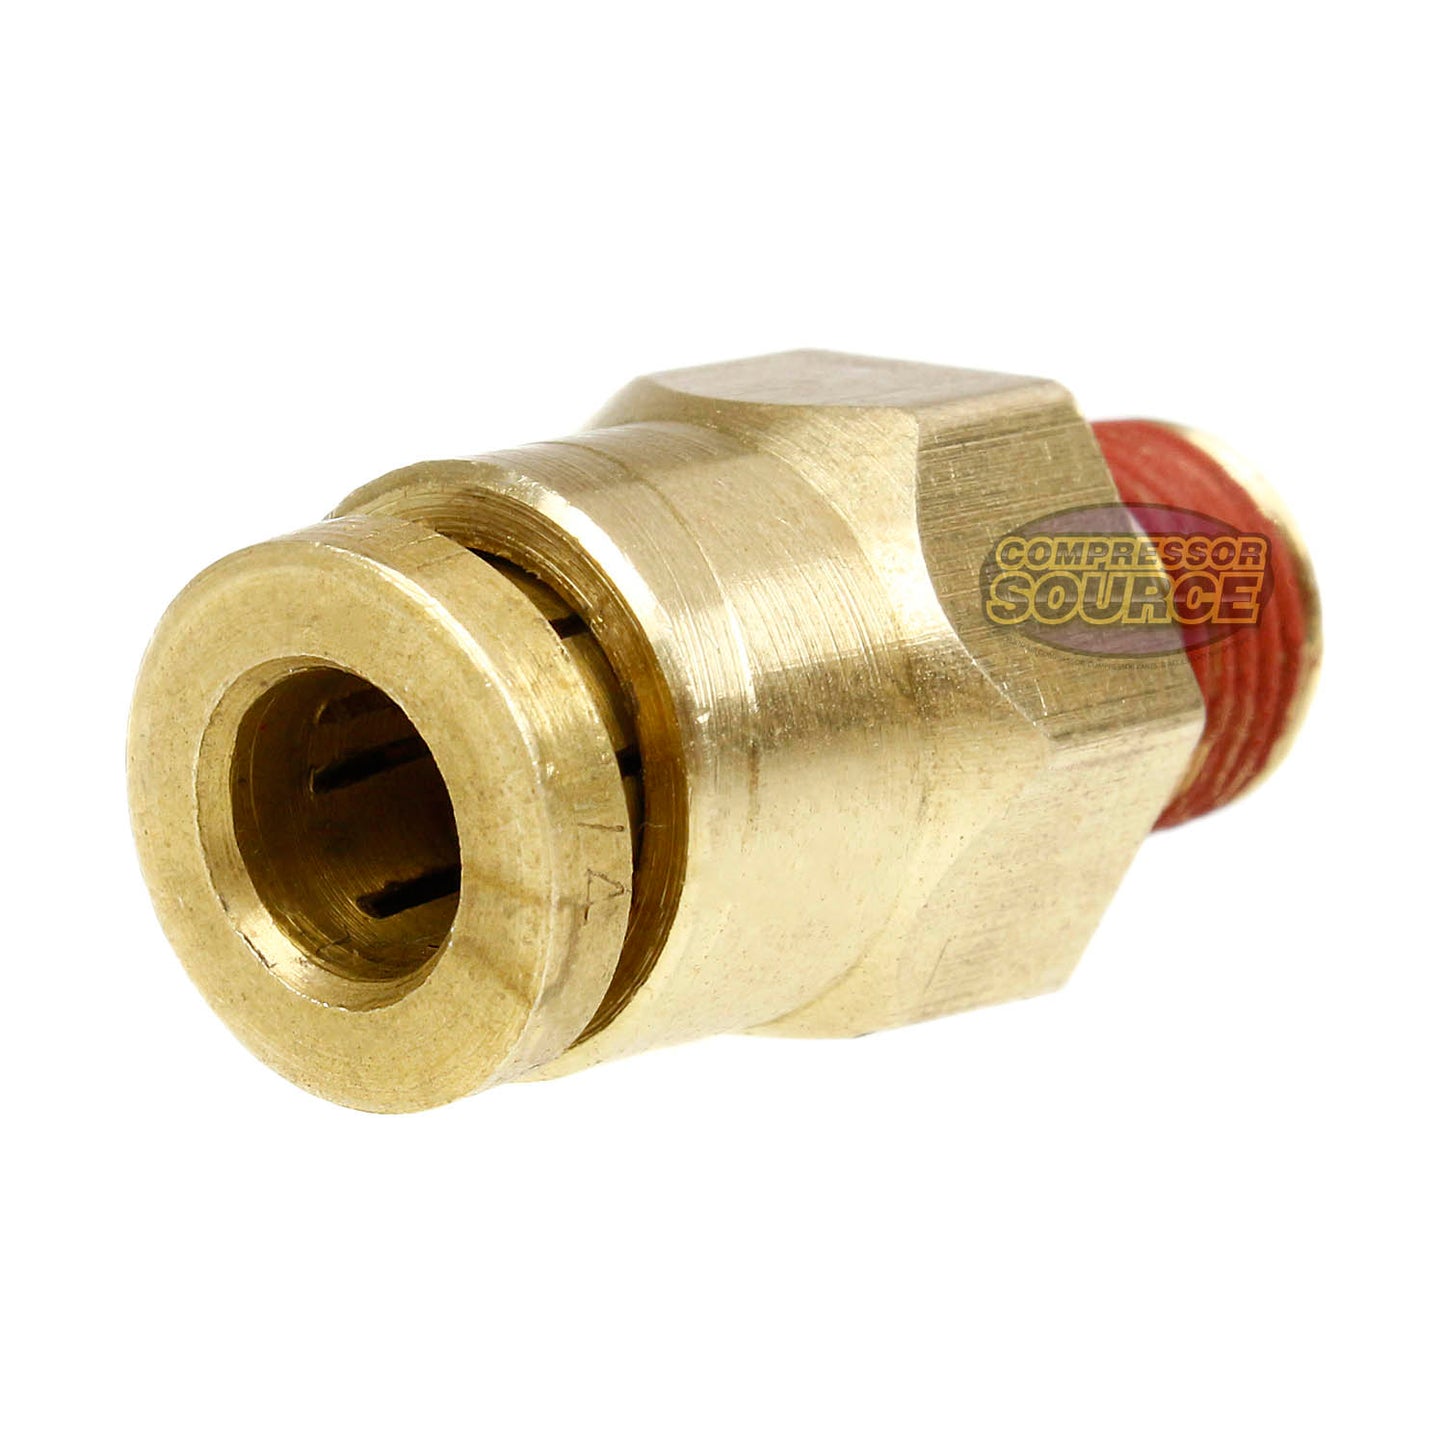 1/4" x 1/8" Male NPTF Brass Push Lock Connector Quick Connect and Disconnect